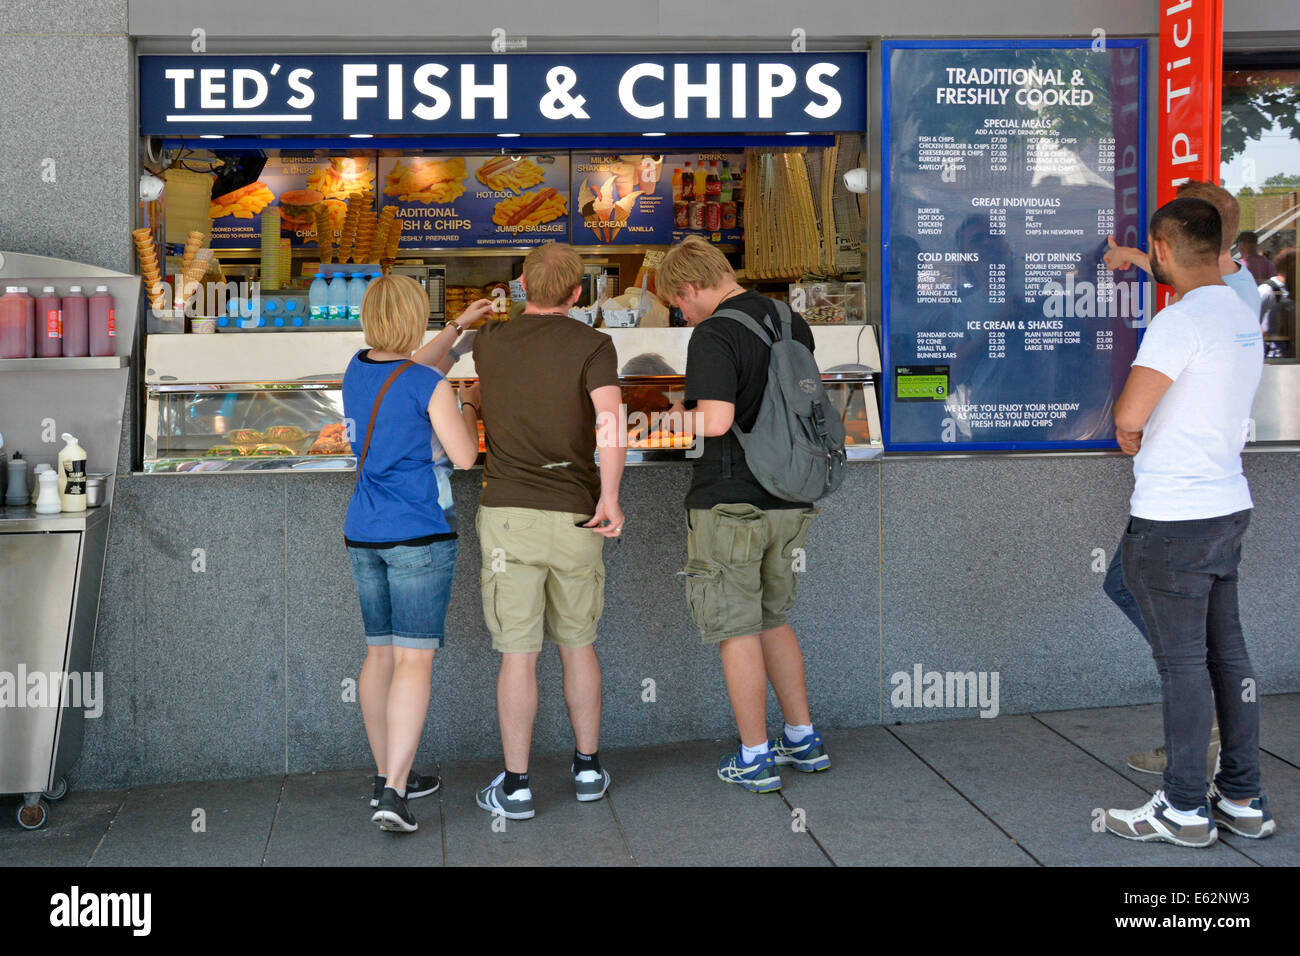 Teds Fish and Chips shop counter back view tourist group customers shopping for traditional British food by people visiting Tower of London England UK Stock Photo